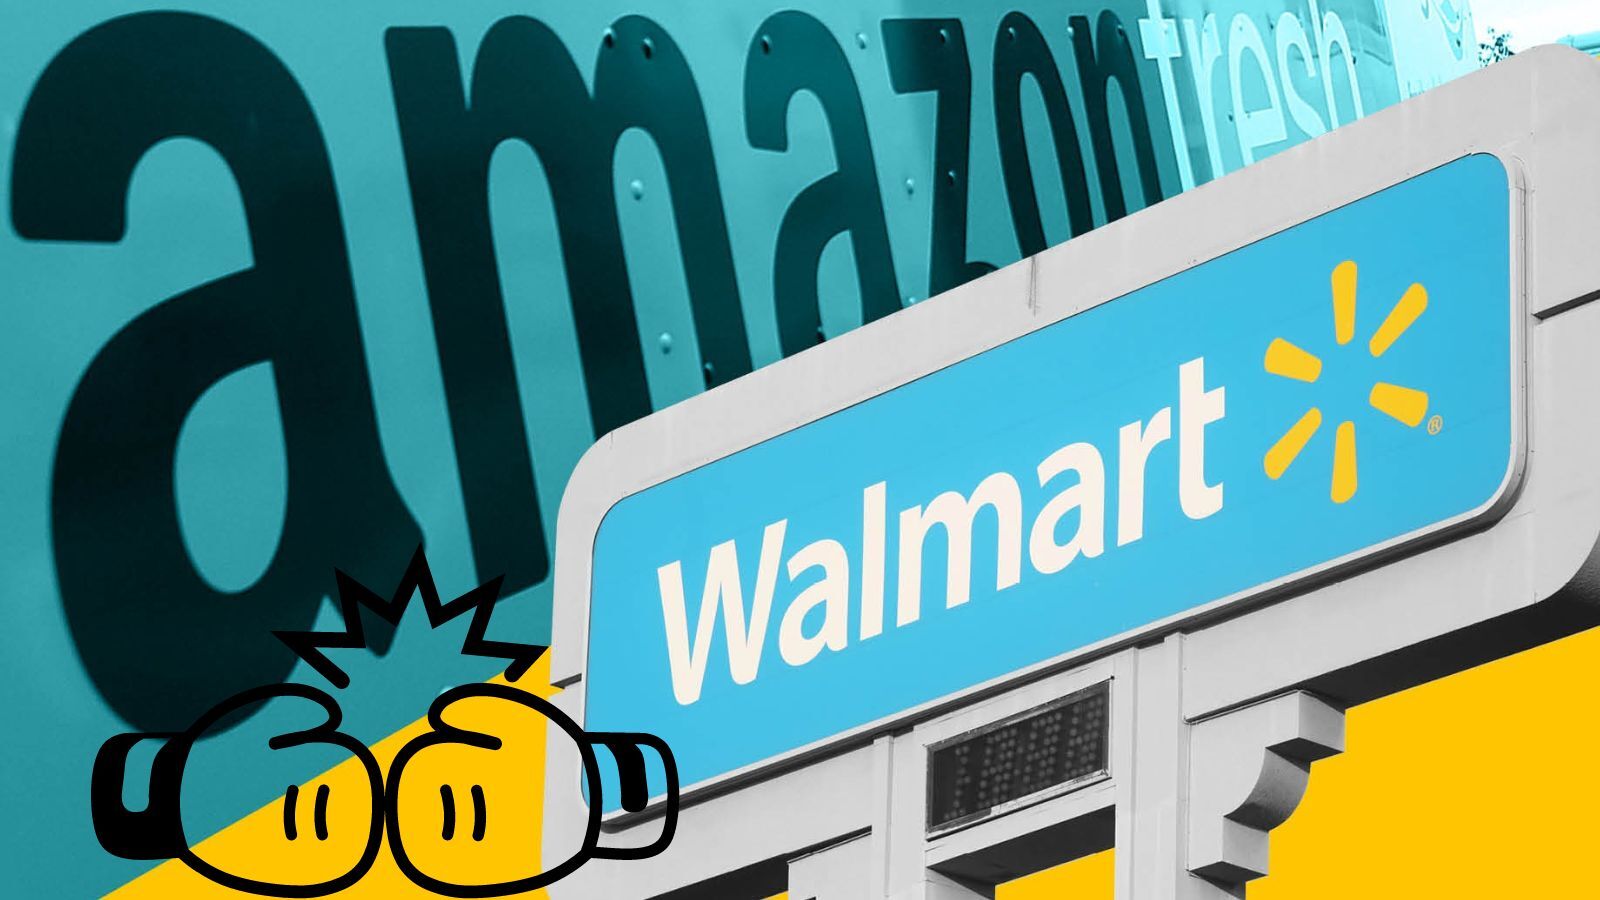 Can Walmart Beat Amazon? (The Answer Is Not So Simple)